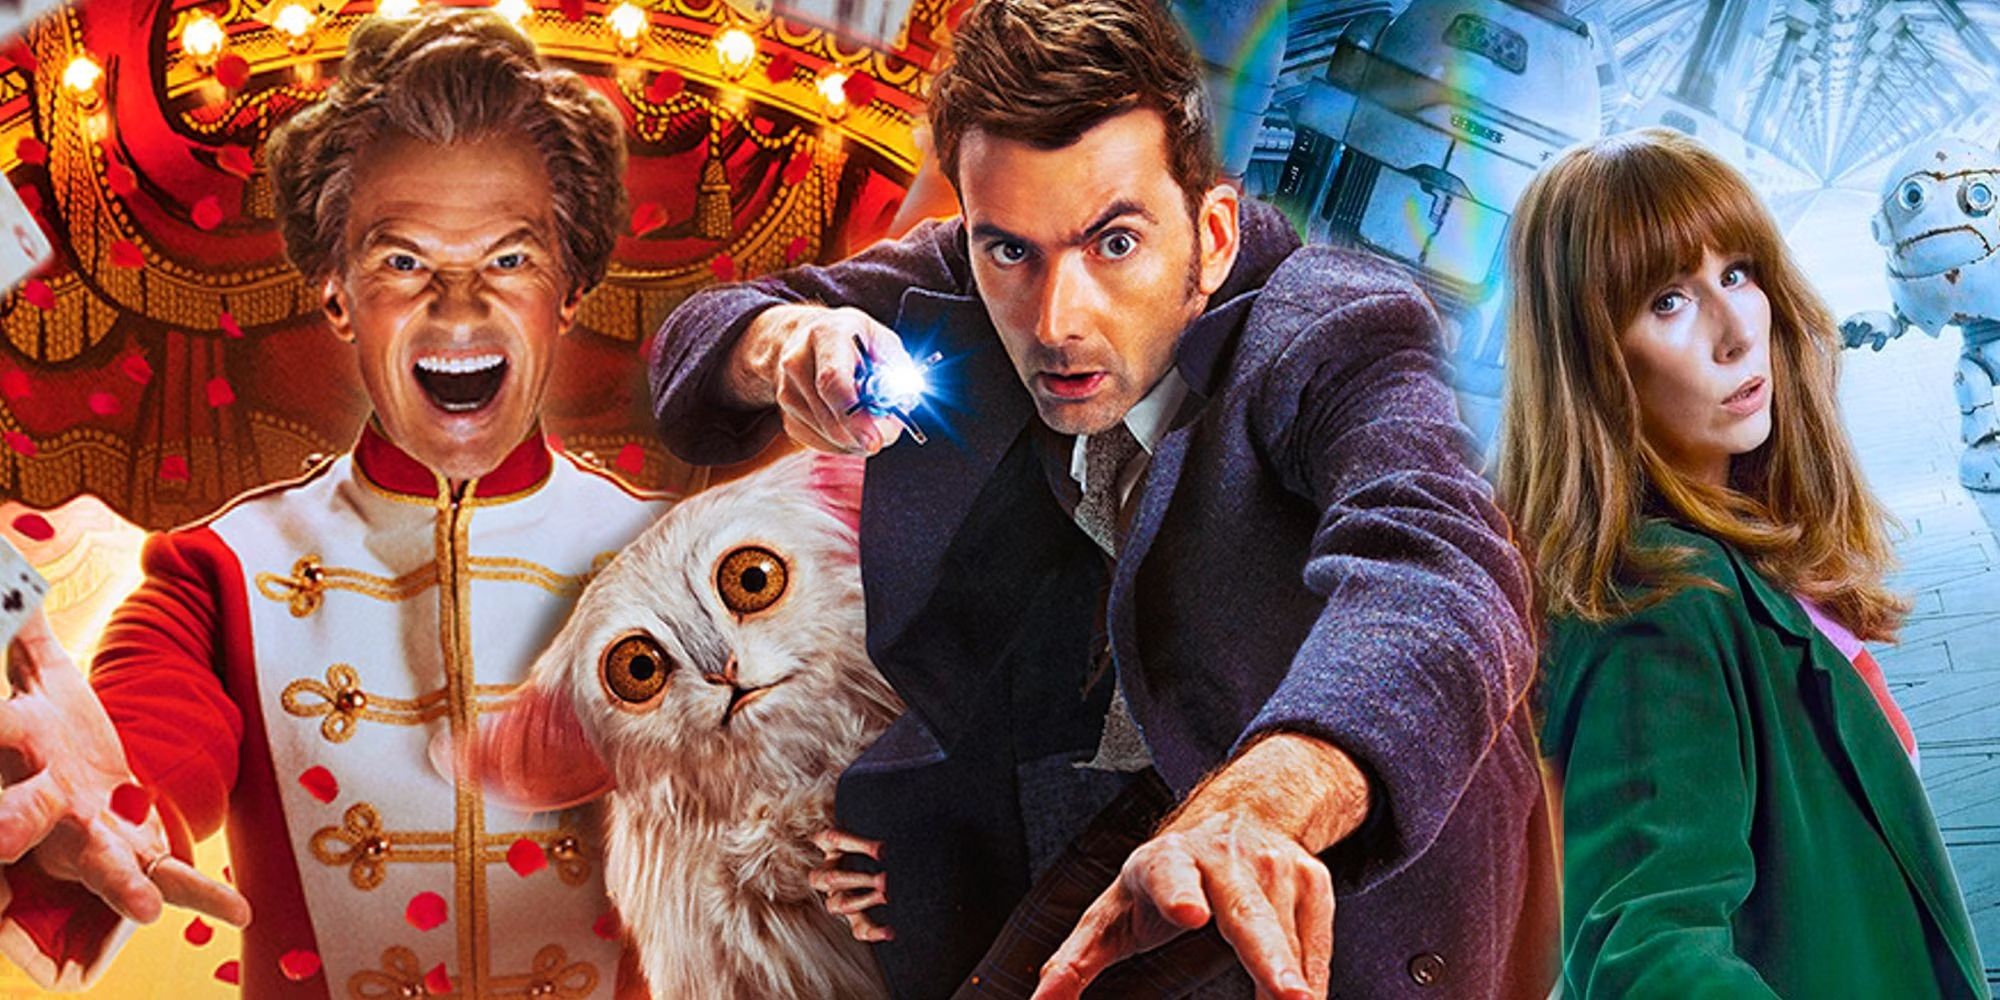 Doctor Who 60th anniversary posters - The Giggle, The Star Beast, and Wild Blue Yonder